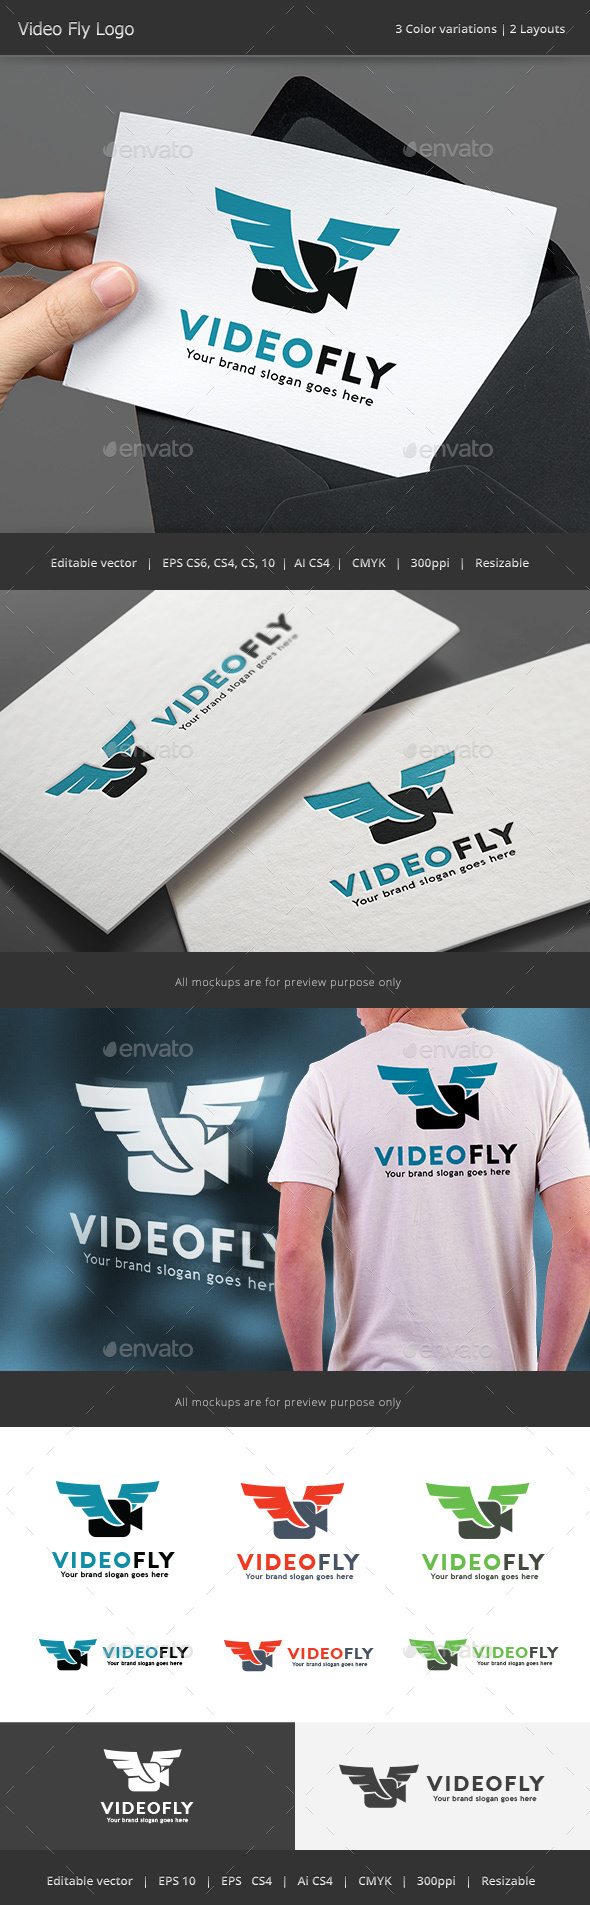 Video Fly Drone Logo